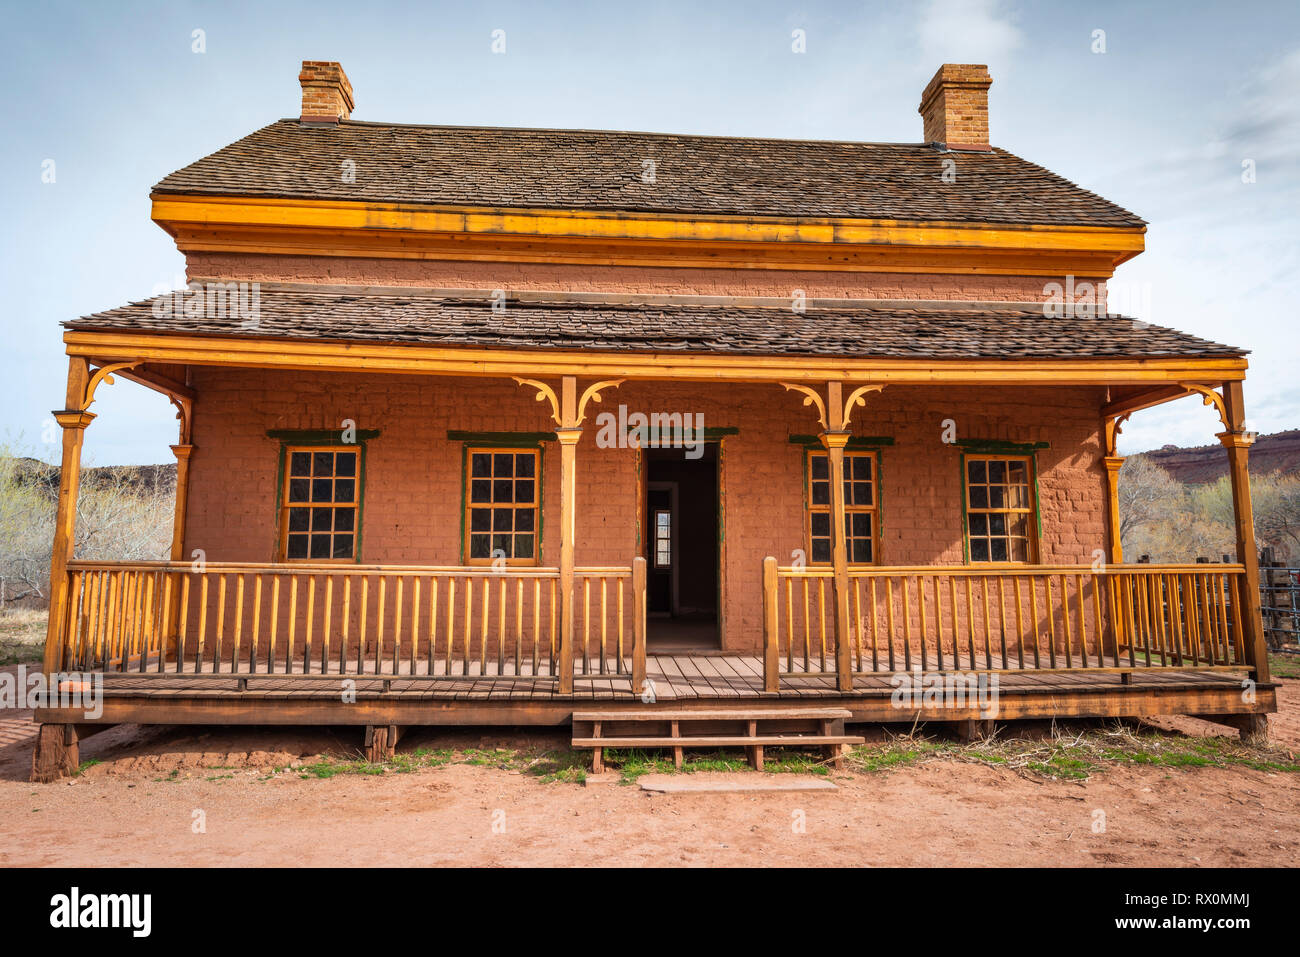 Alonzo Russell adobe house (featured in the film "Butch Cassidy and the Sundance Kid"), Grafton ghost town, Utah USA Stock Photo